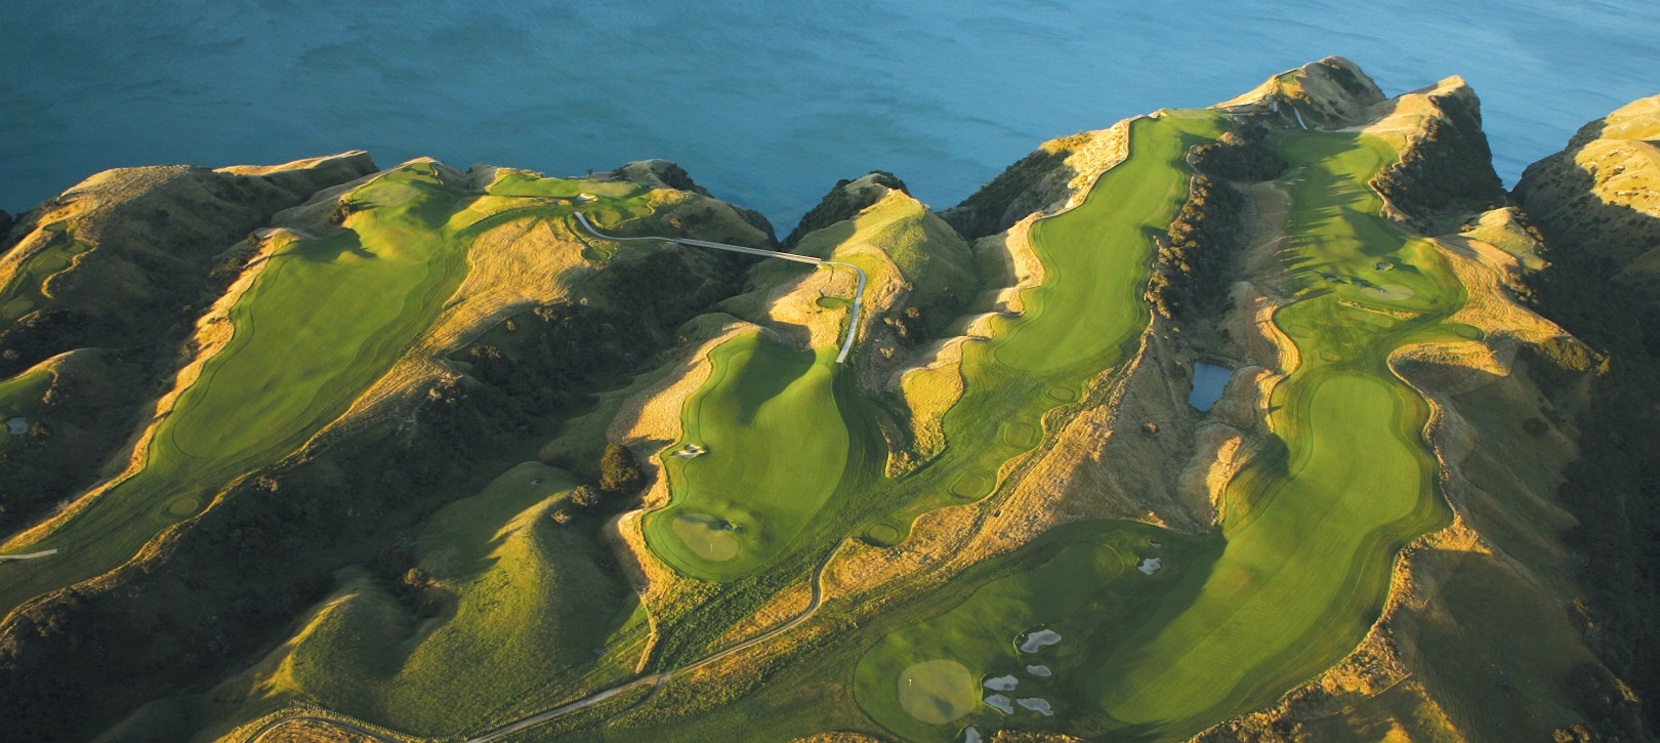 Robertson luxurious Lodges Cape Kidnappers , Hawke’s Bay / New Zealand 